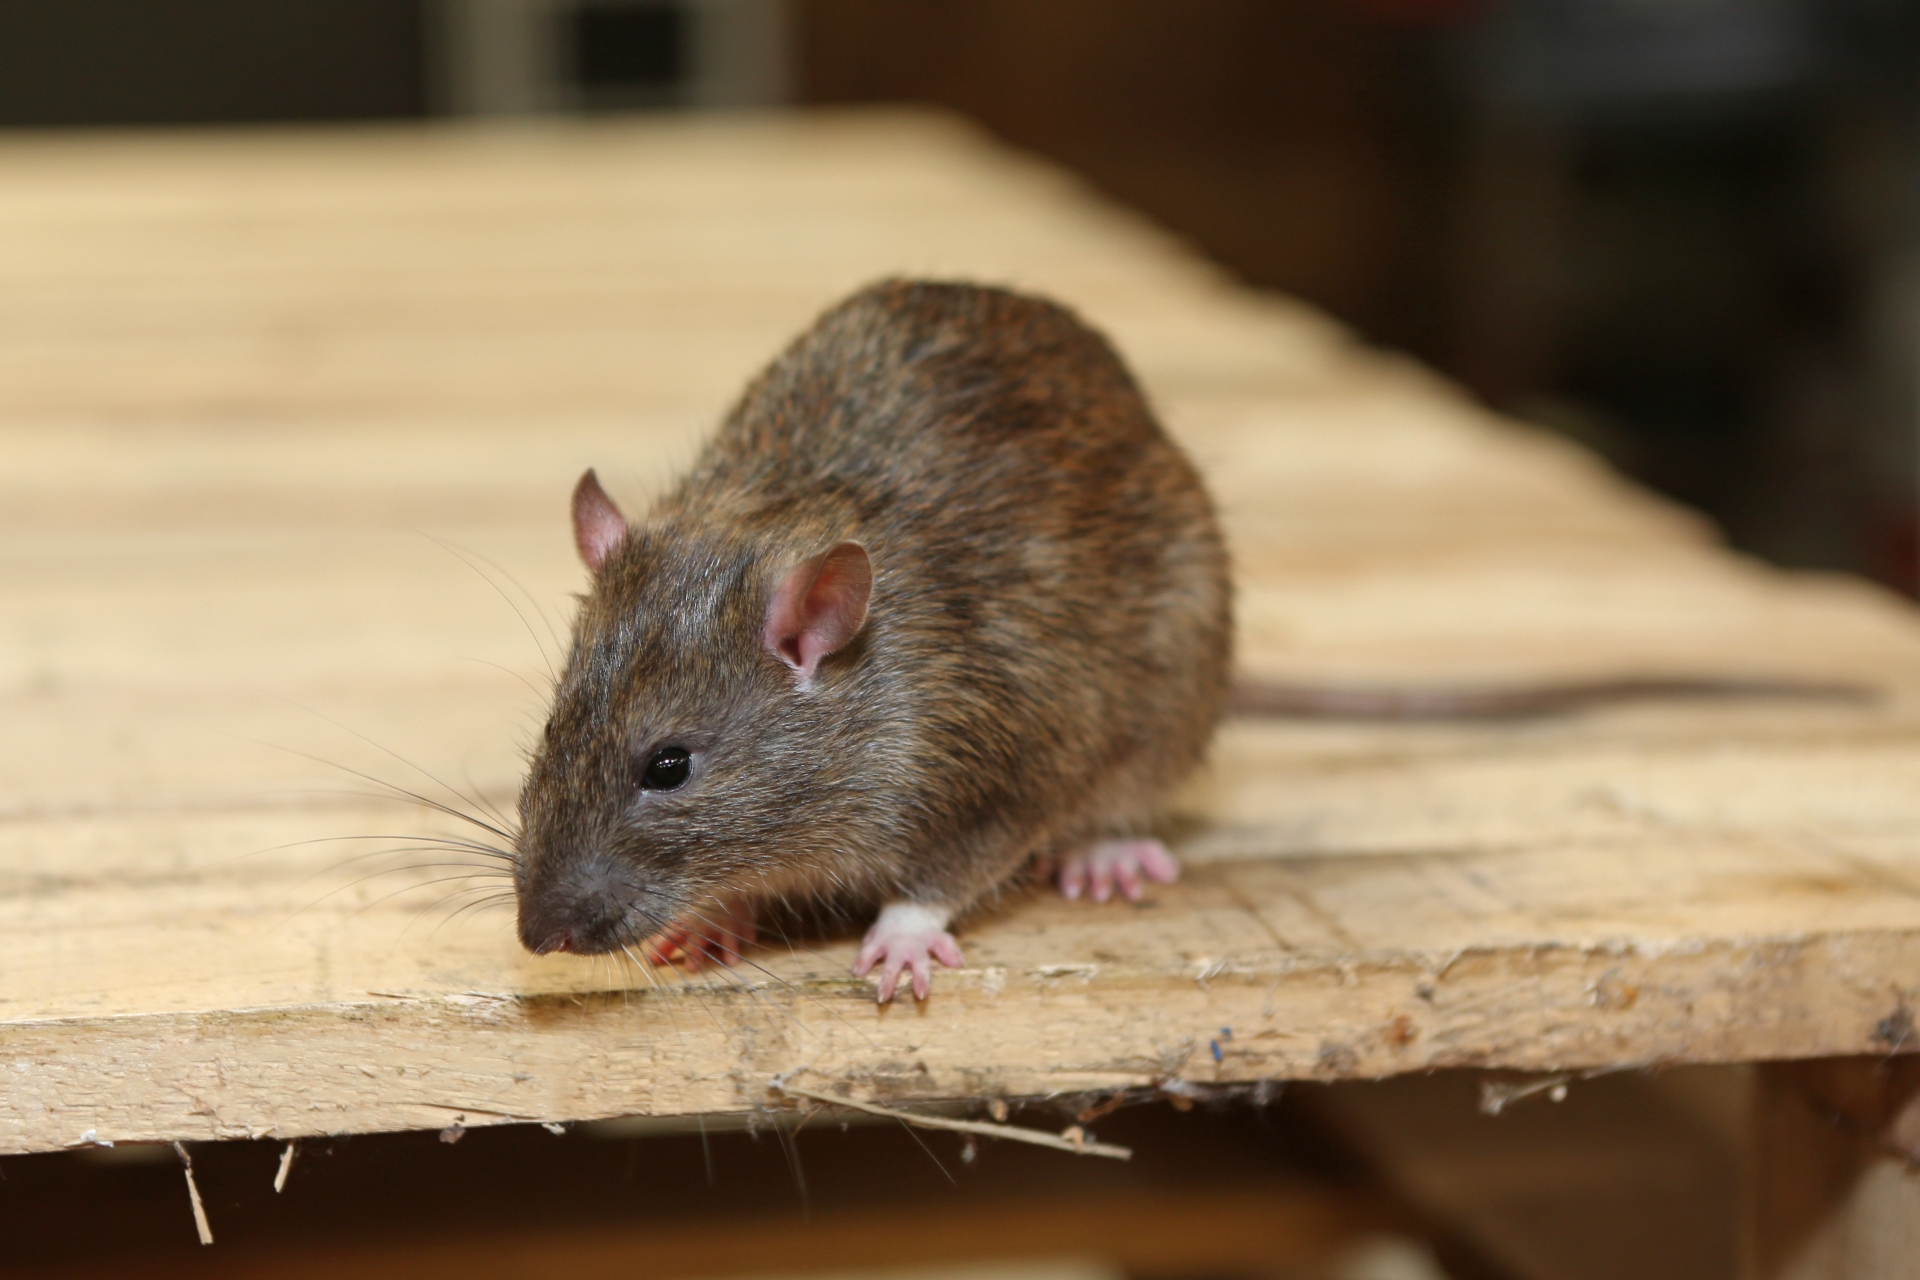 Rat Infestation, Pest Control in Finsbury Park, Manor House, N4. Call Now 020 8166 9746